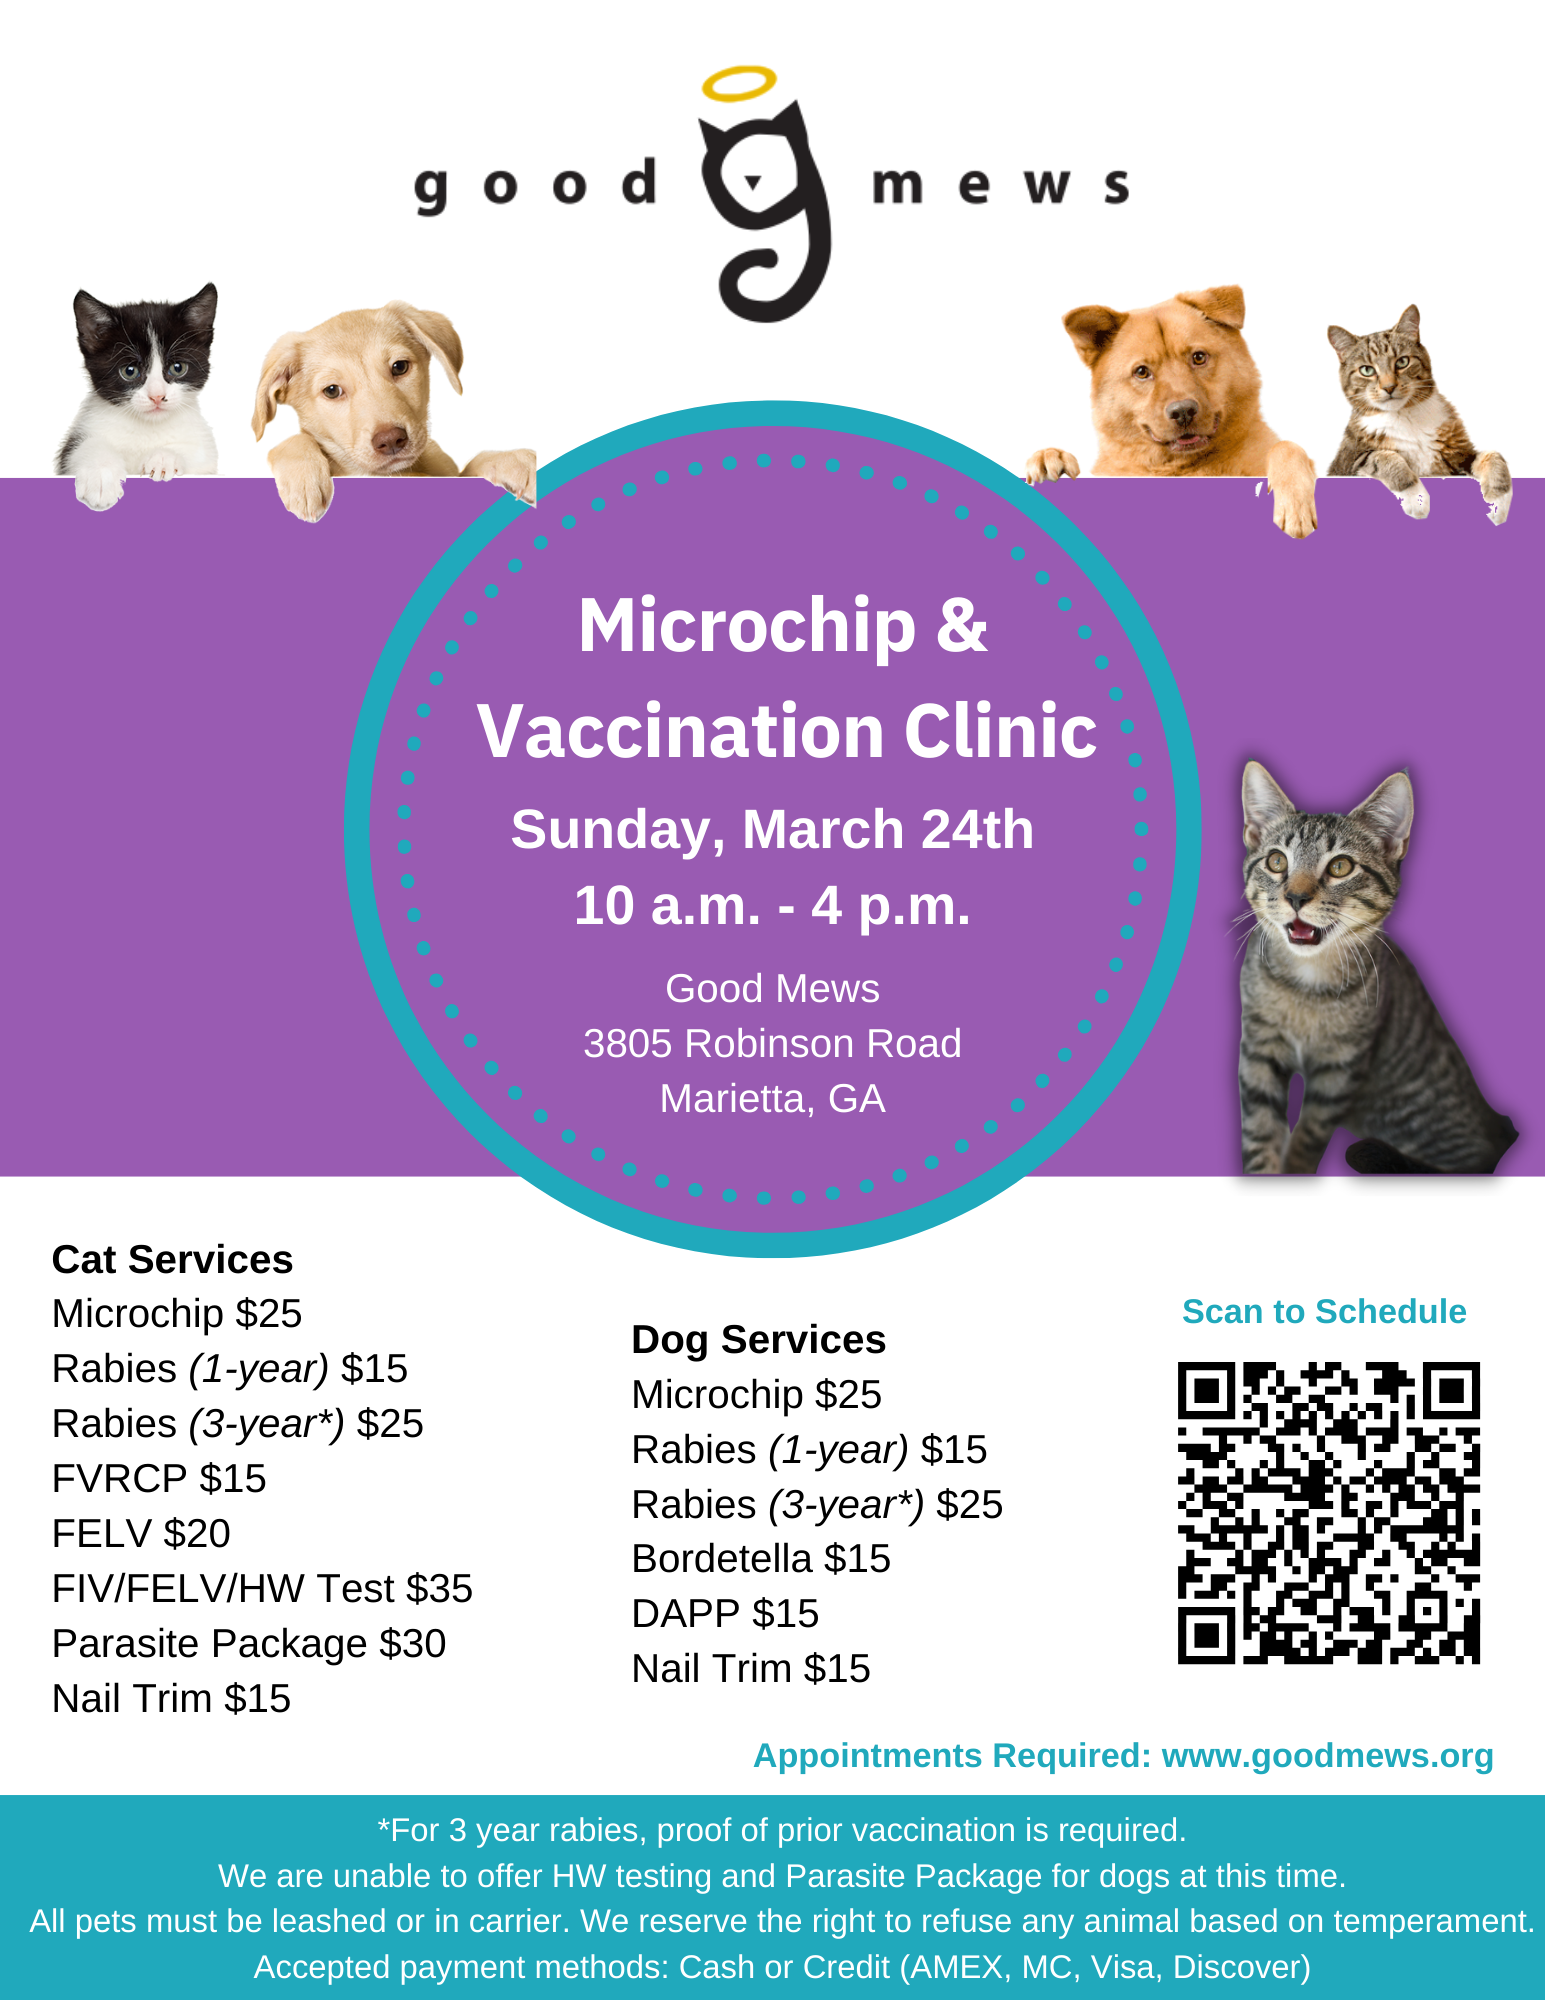 Good Mews Animal Foundation - Microchip and Vaccination Clinic